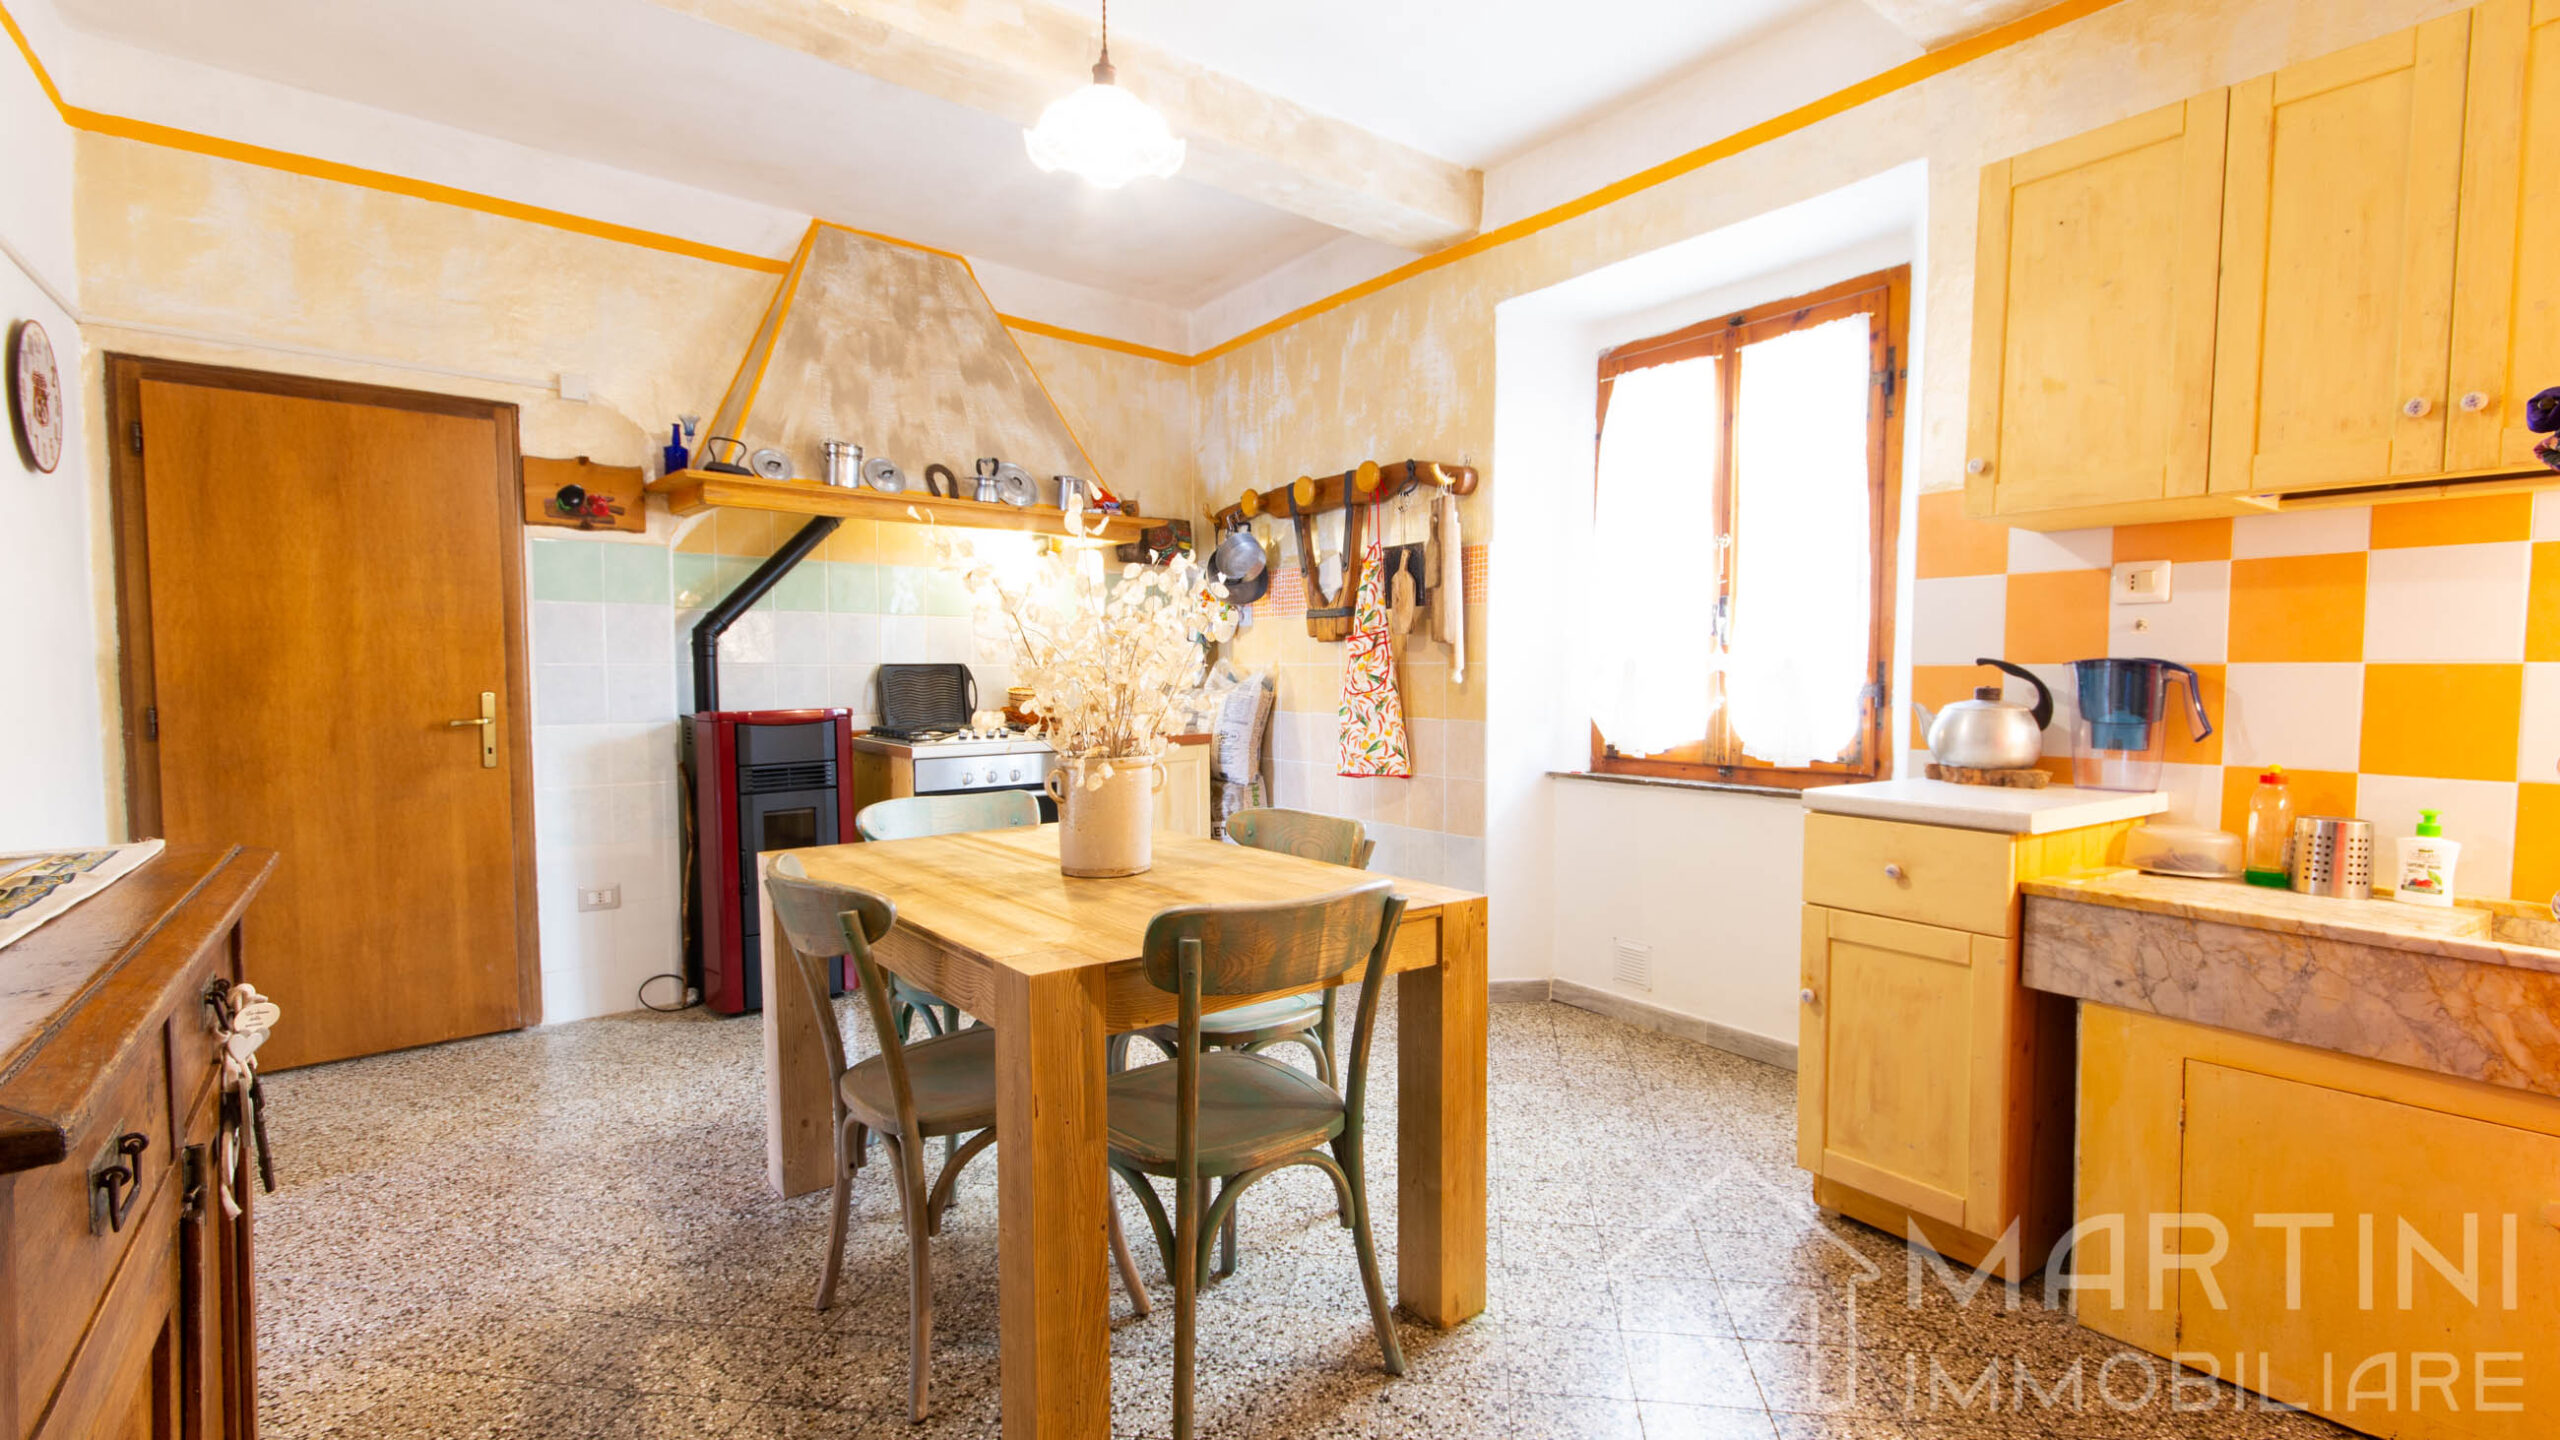 Nice Apartment in Tuscany Ready To Live In